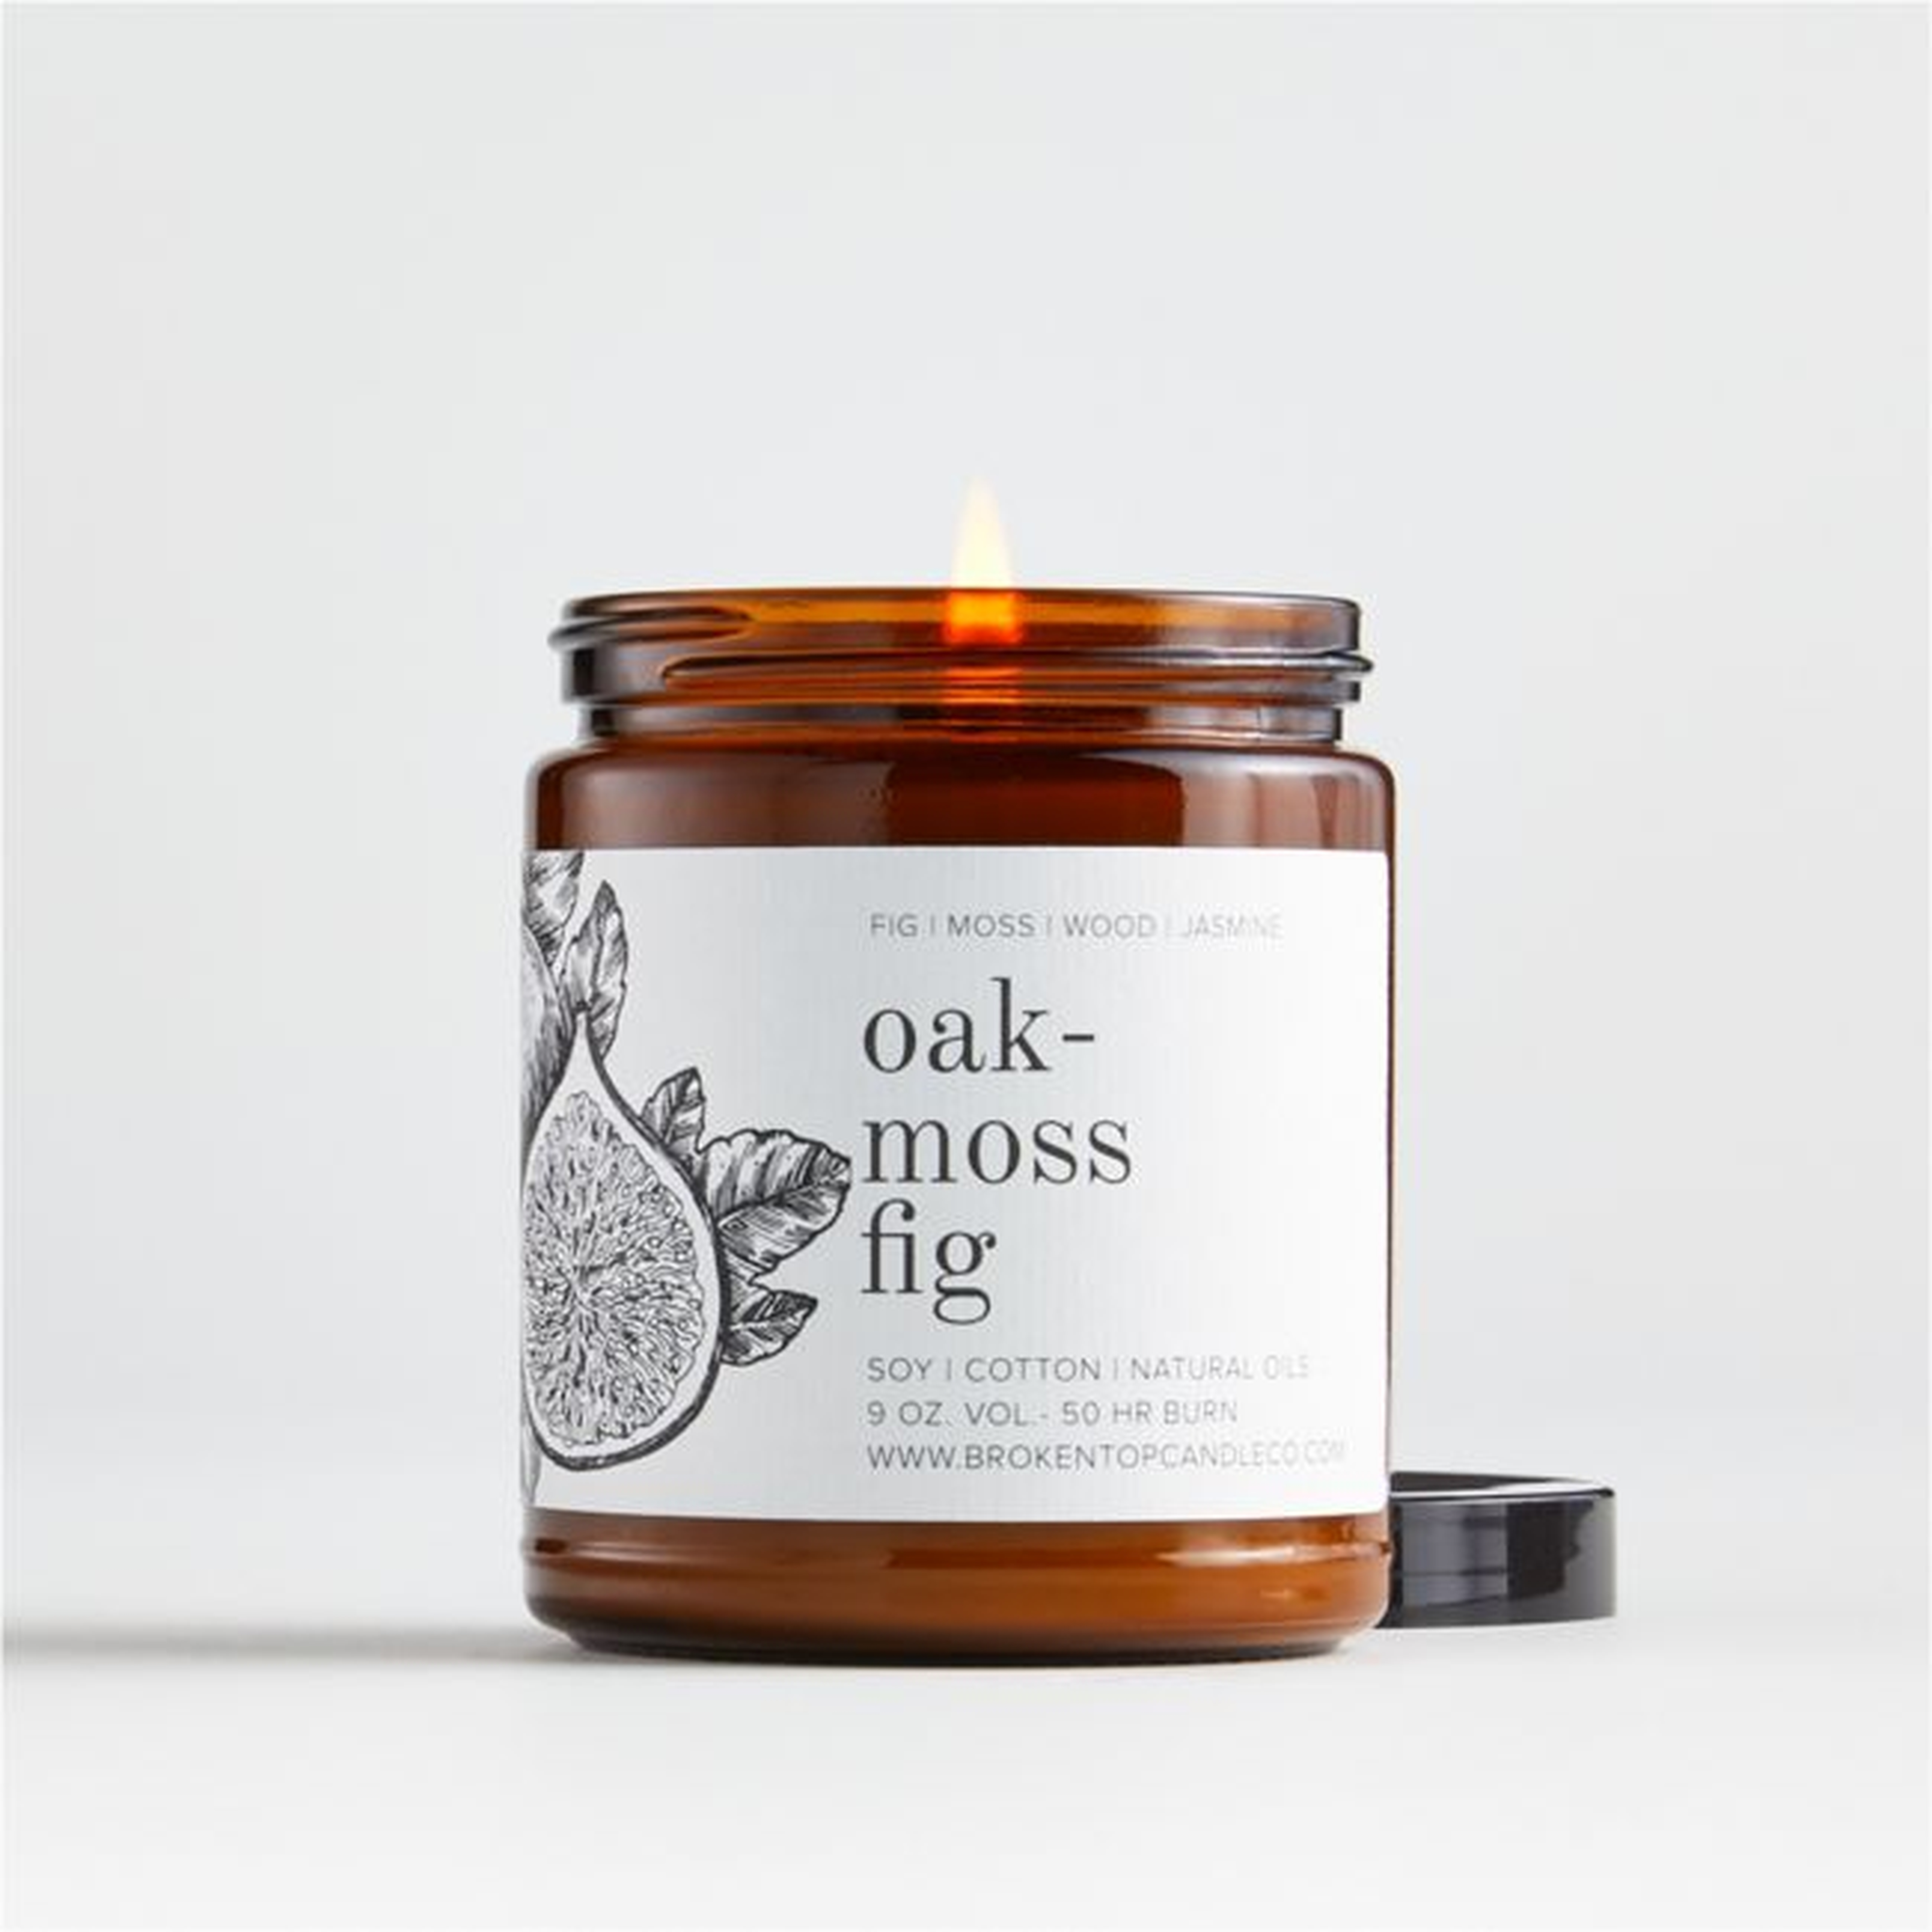 Oakmoss and Fig Soy Candle 9oz - Crate and Barrel